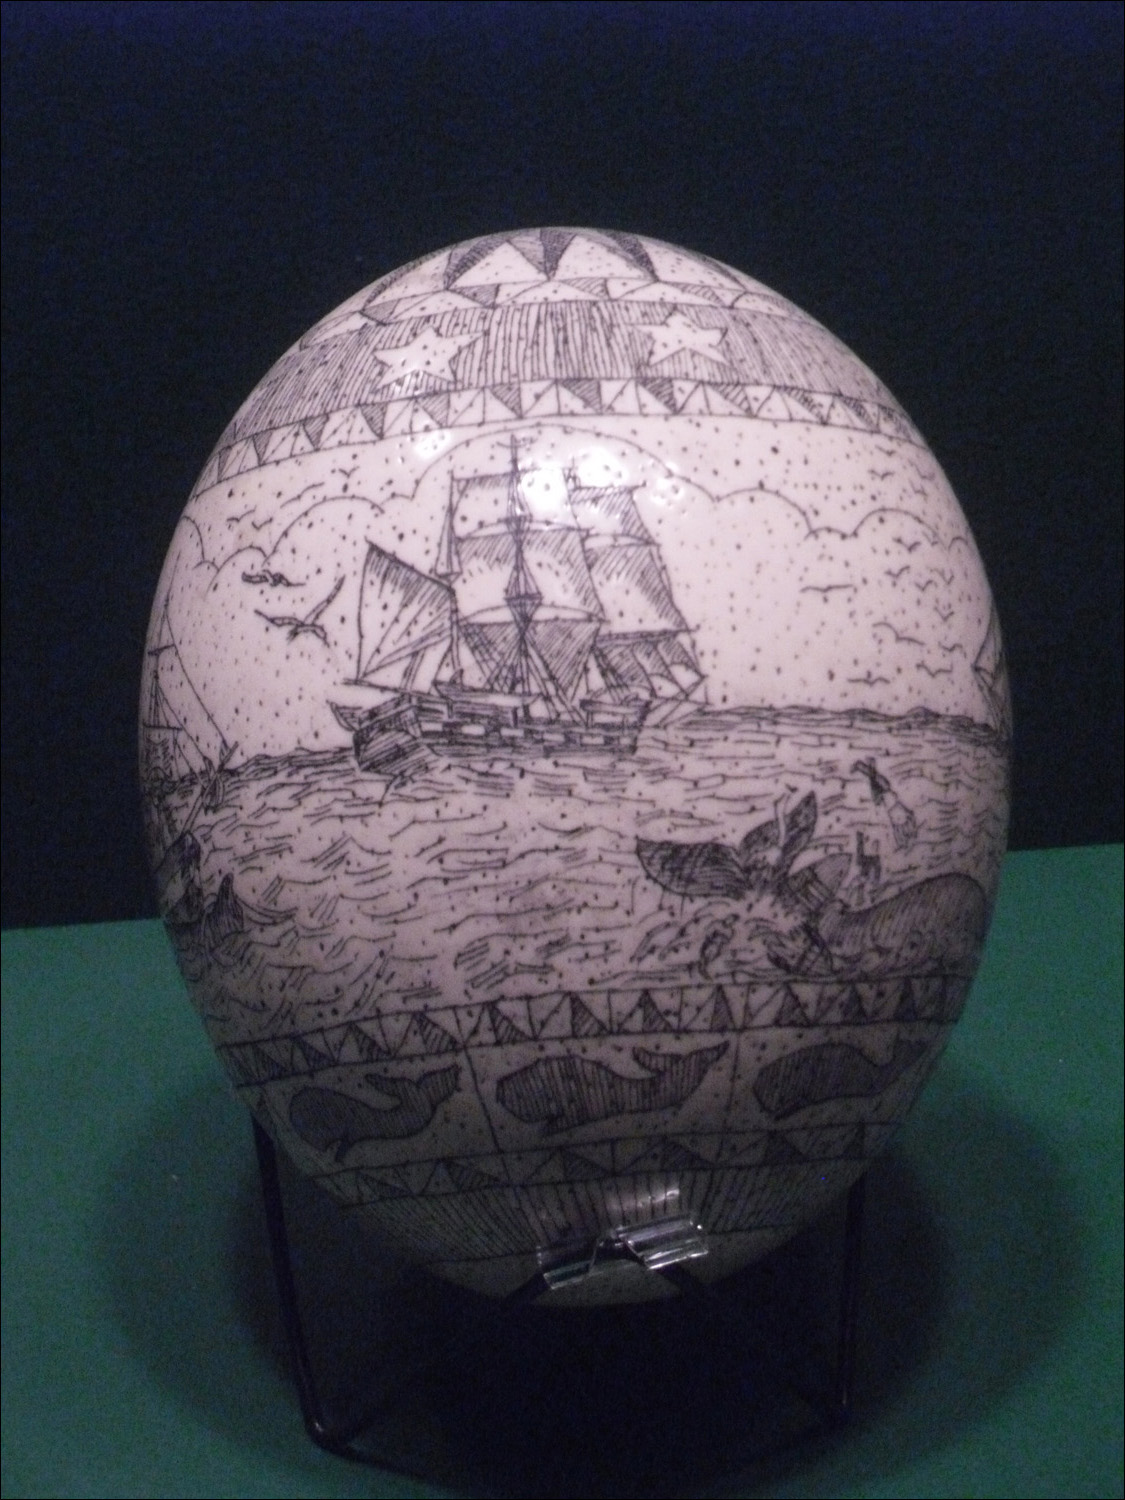 Astoria, OR-Photos in the Maritime Museum-scrimshaw on ostrich egg